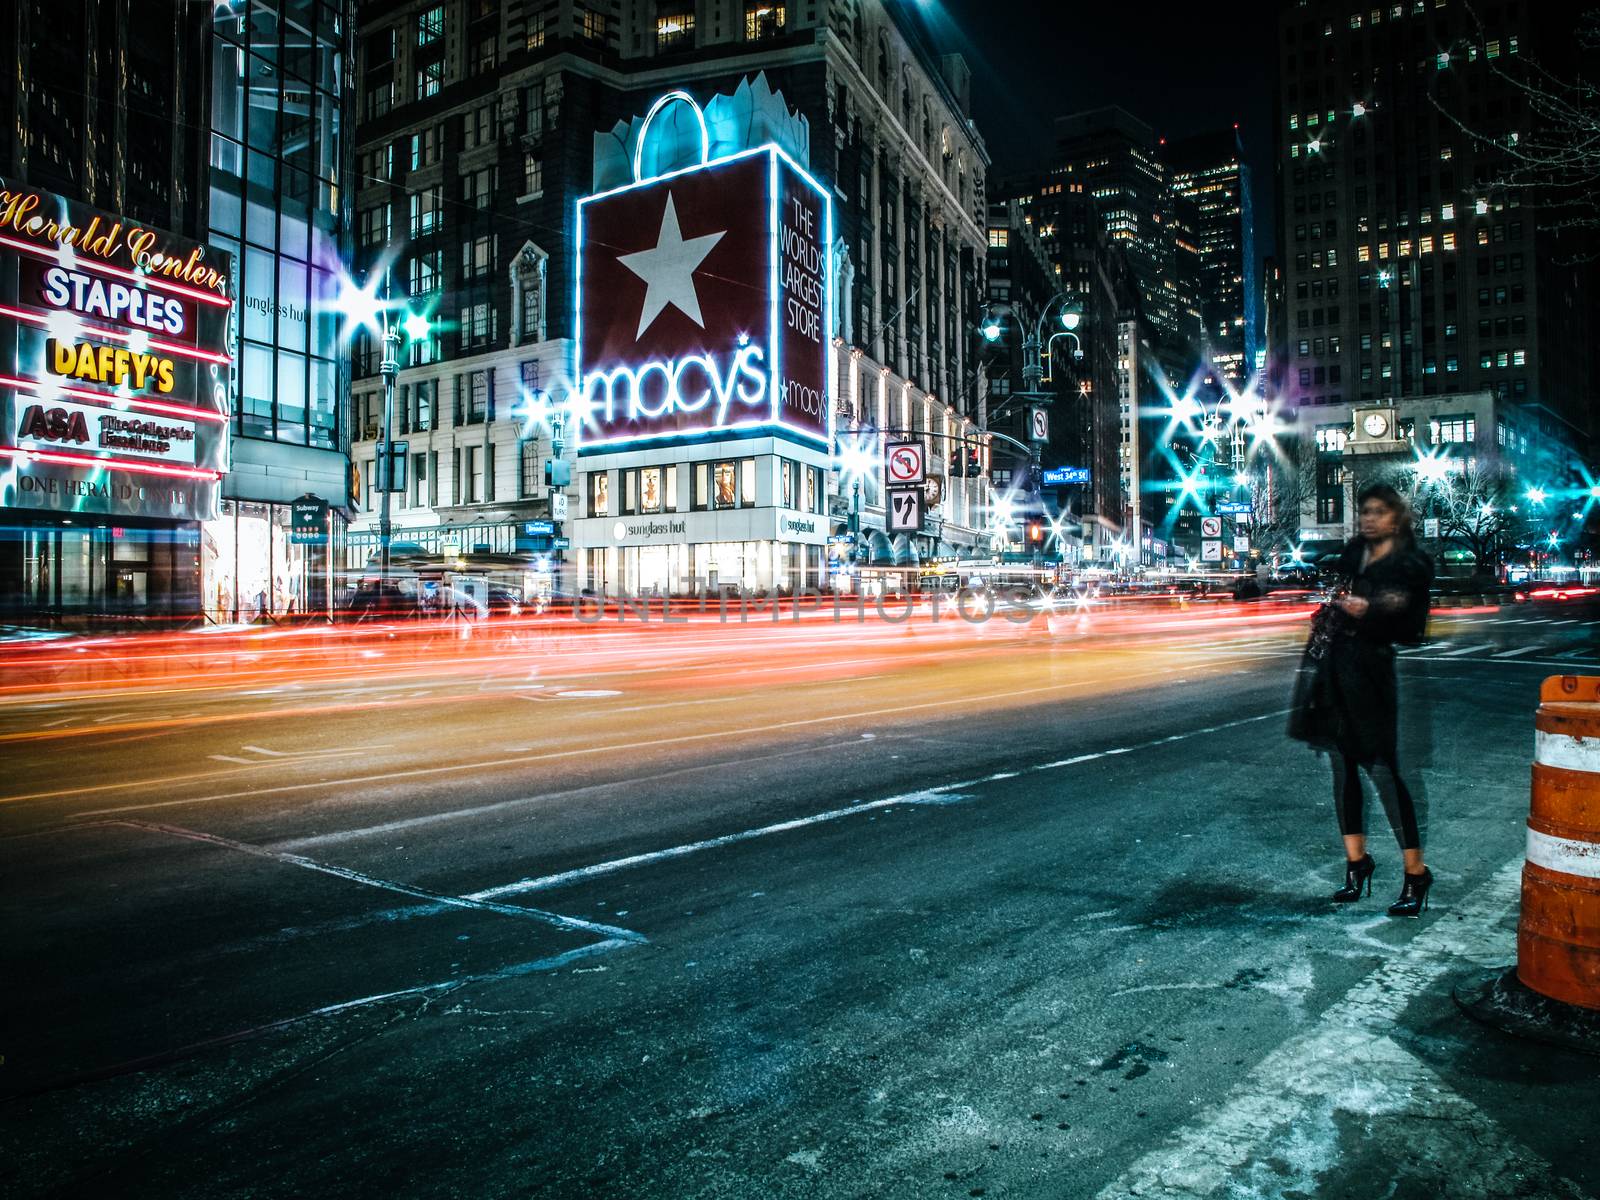 Hailing a cab in New York City at night